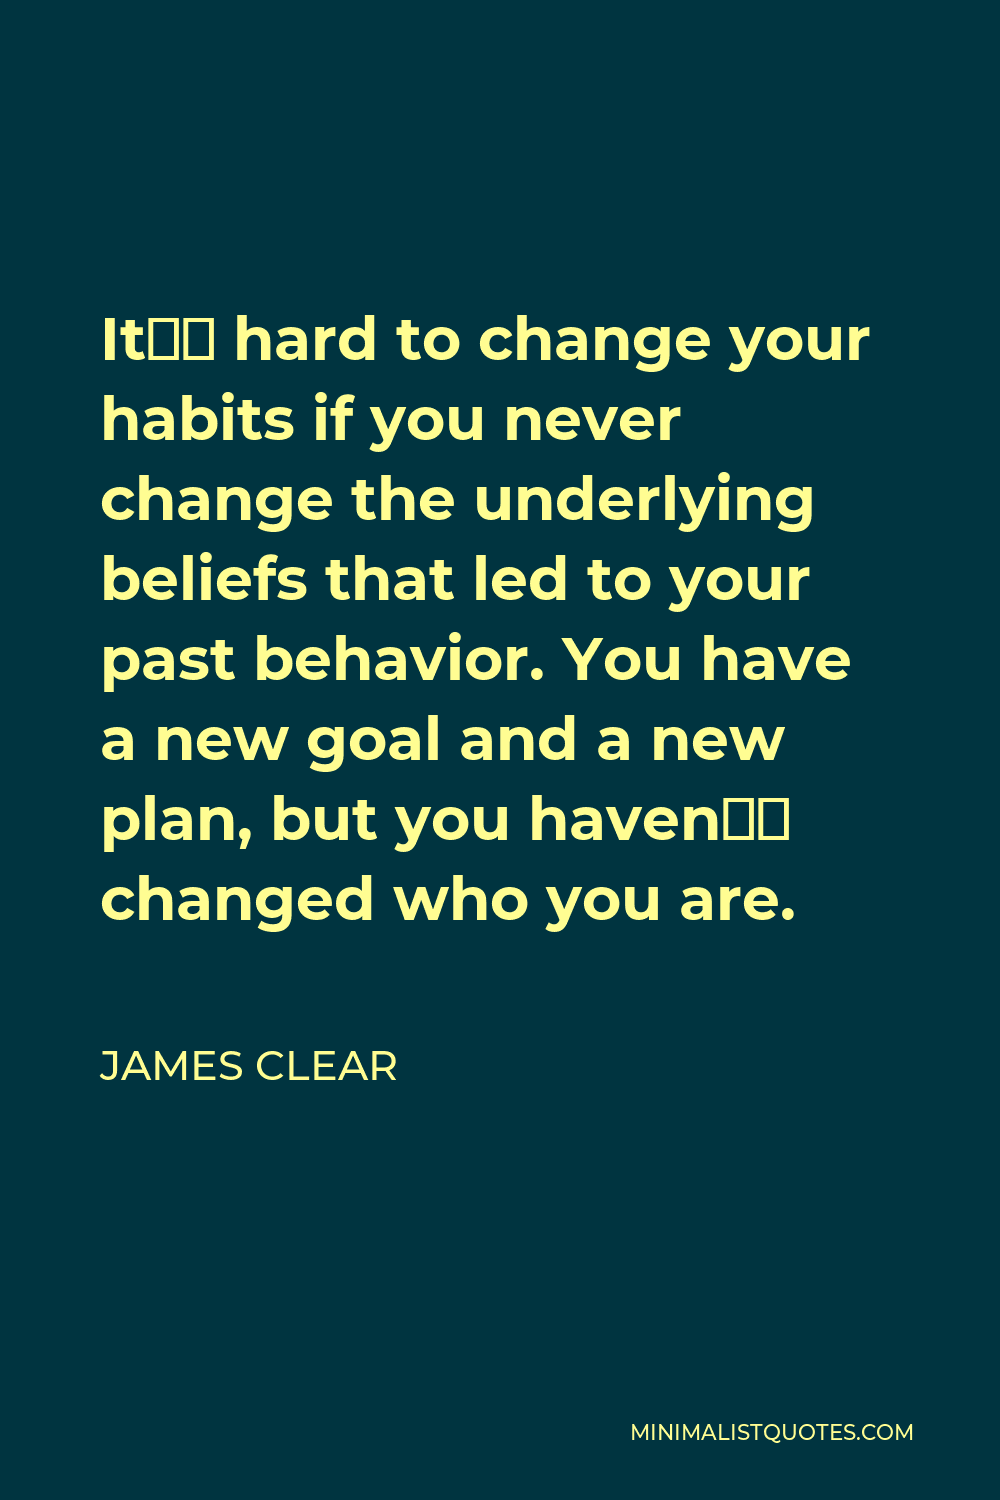 James Clear Quote - It’s hard to change your habits if you never change the underlying beliefs that led to your past behavior. You have a new goal and a new plan, but you haven’t changed who you are.